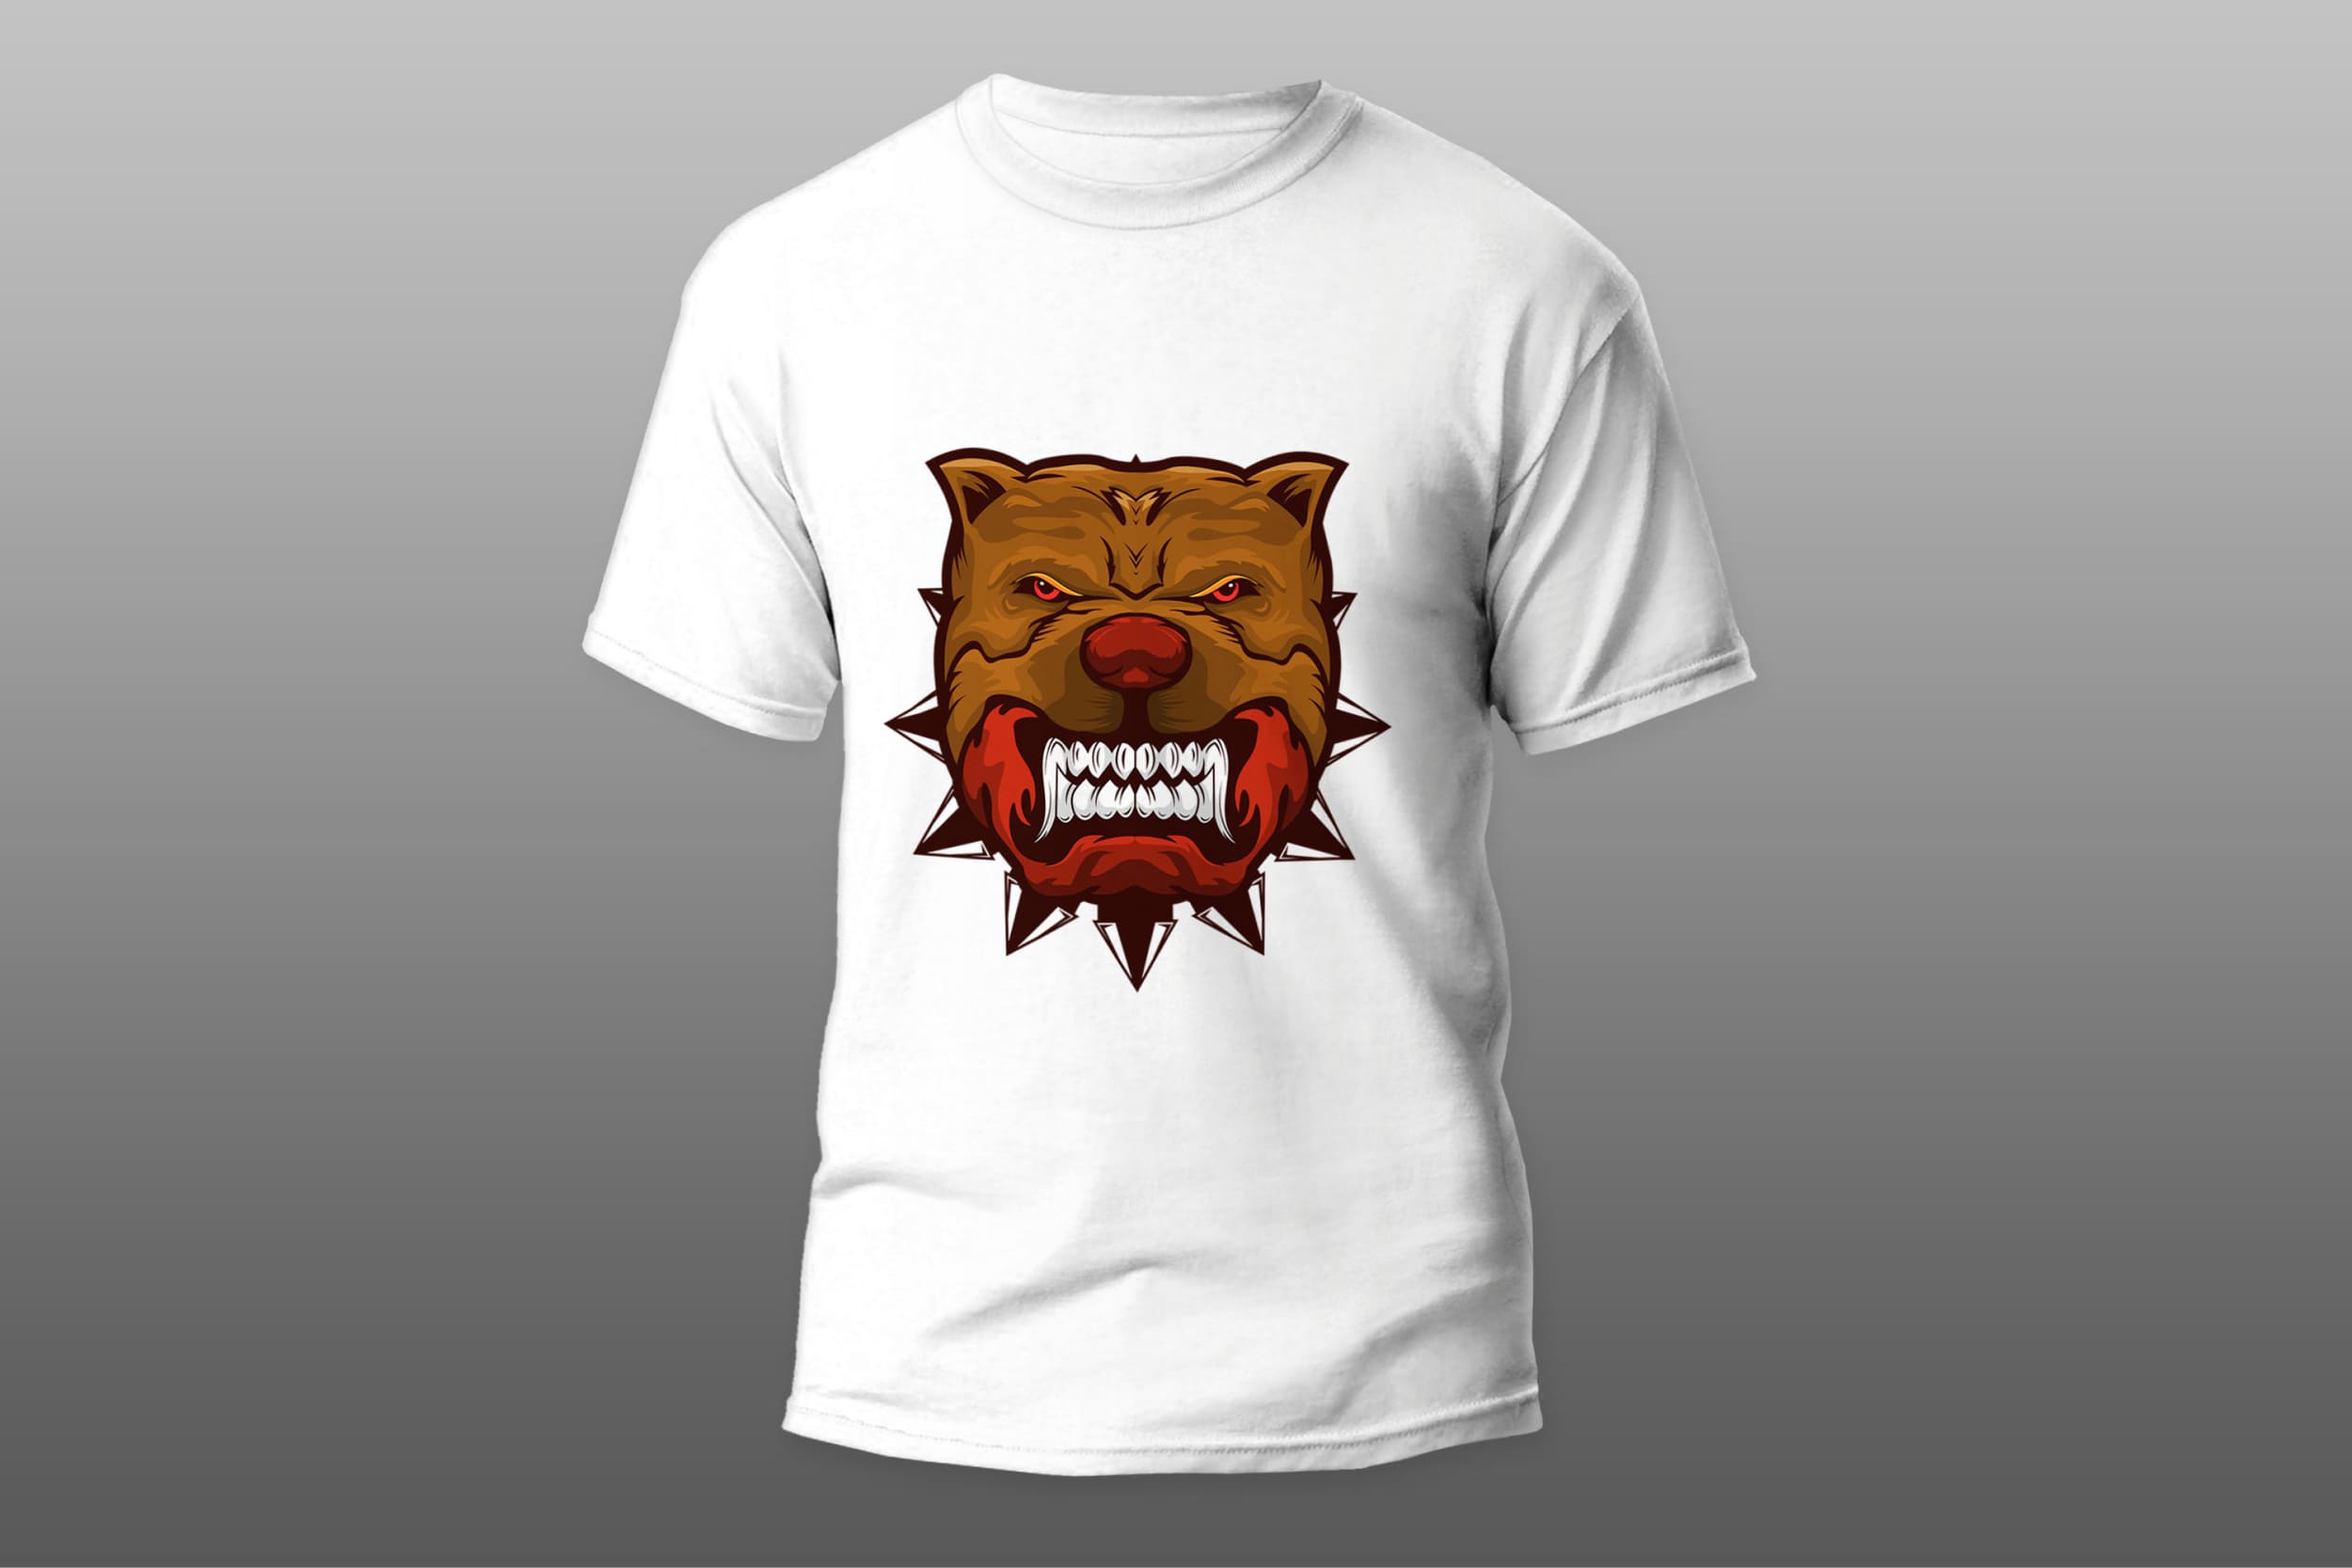 White T-shirt with a brown angry pitbull face on a gray gradient background.